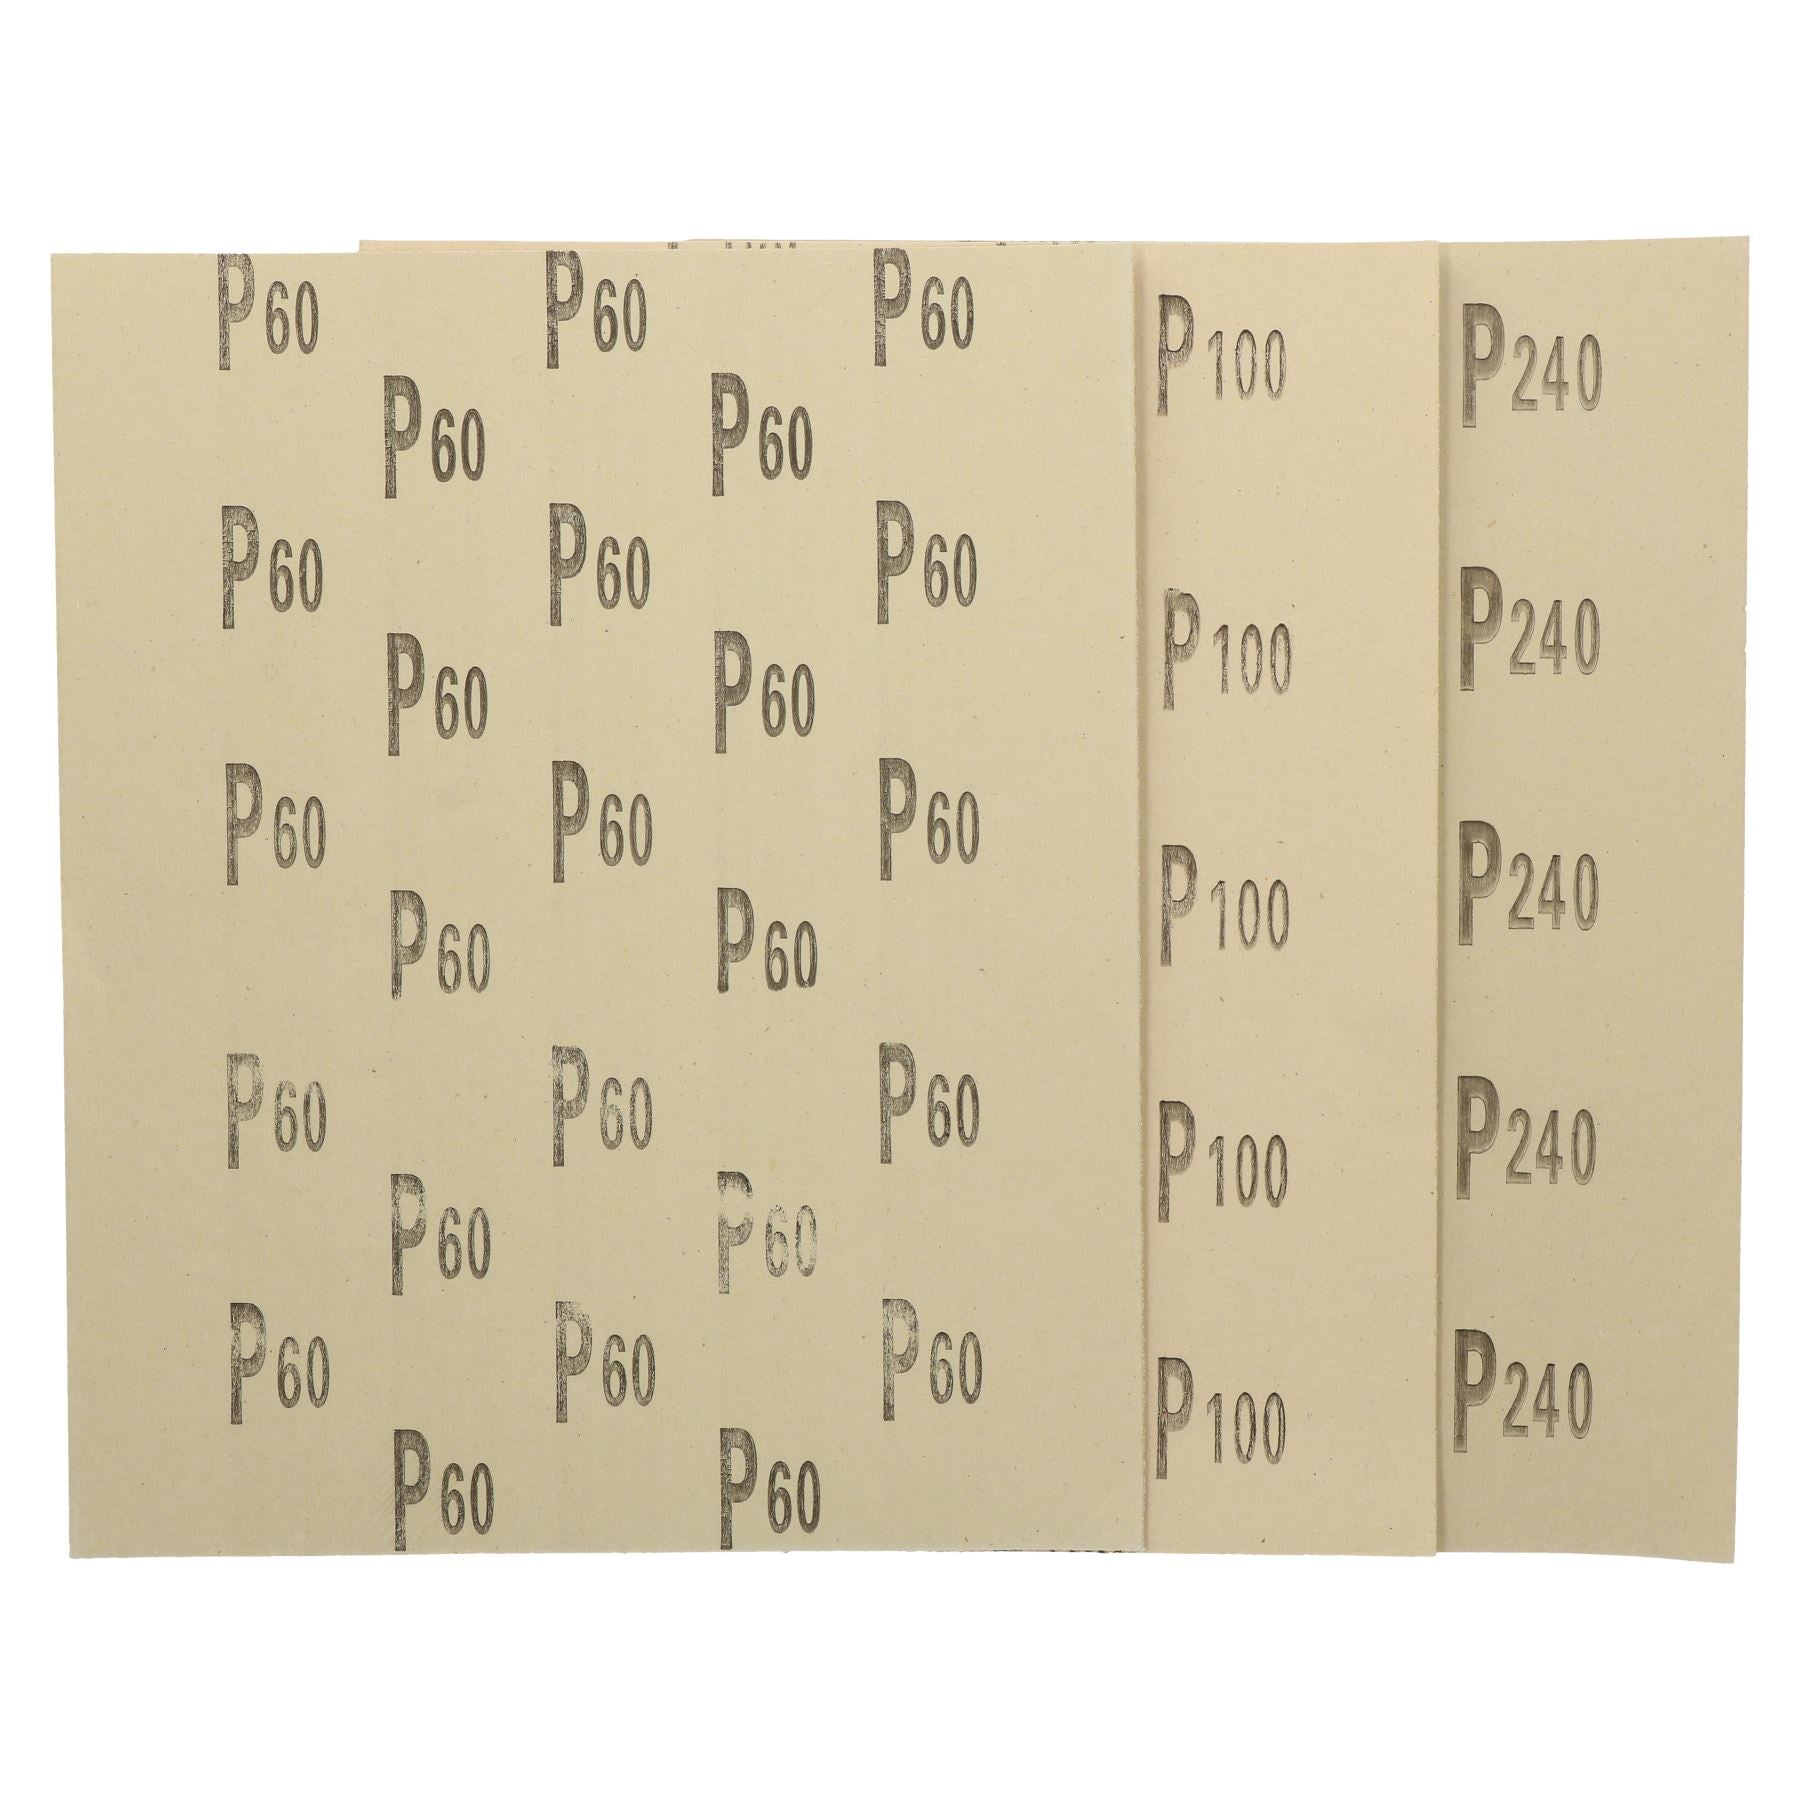 10pc Assorted Sandpaper Sanding Sheets For Metal Wood Plastic Mixed Grit Pack